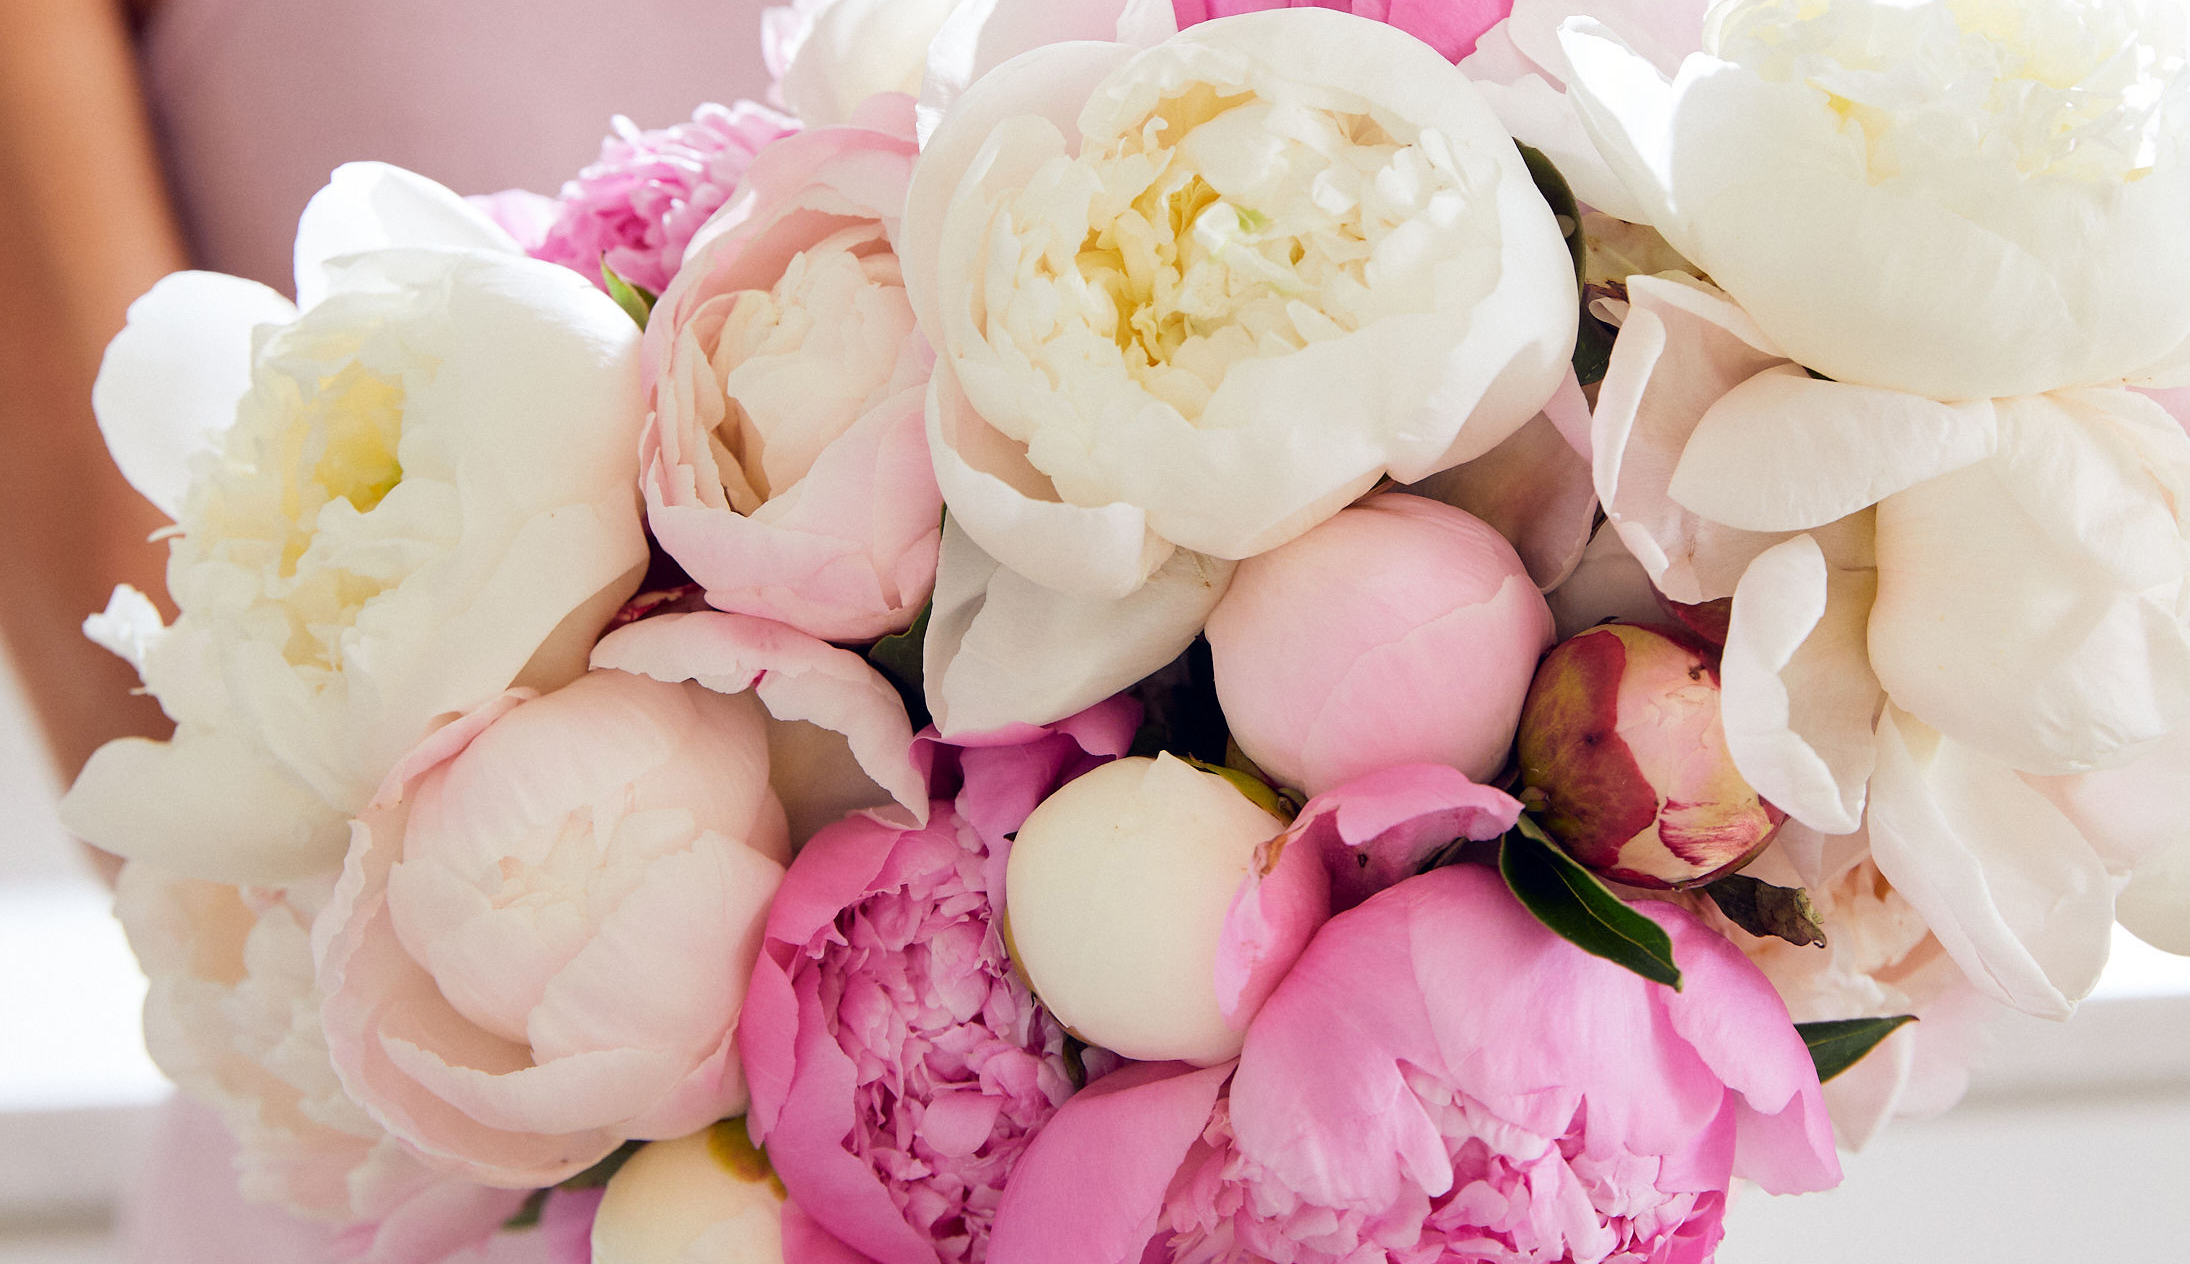 An armful of pink peonies perfect for a summer wedding